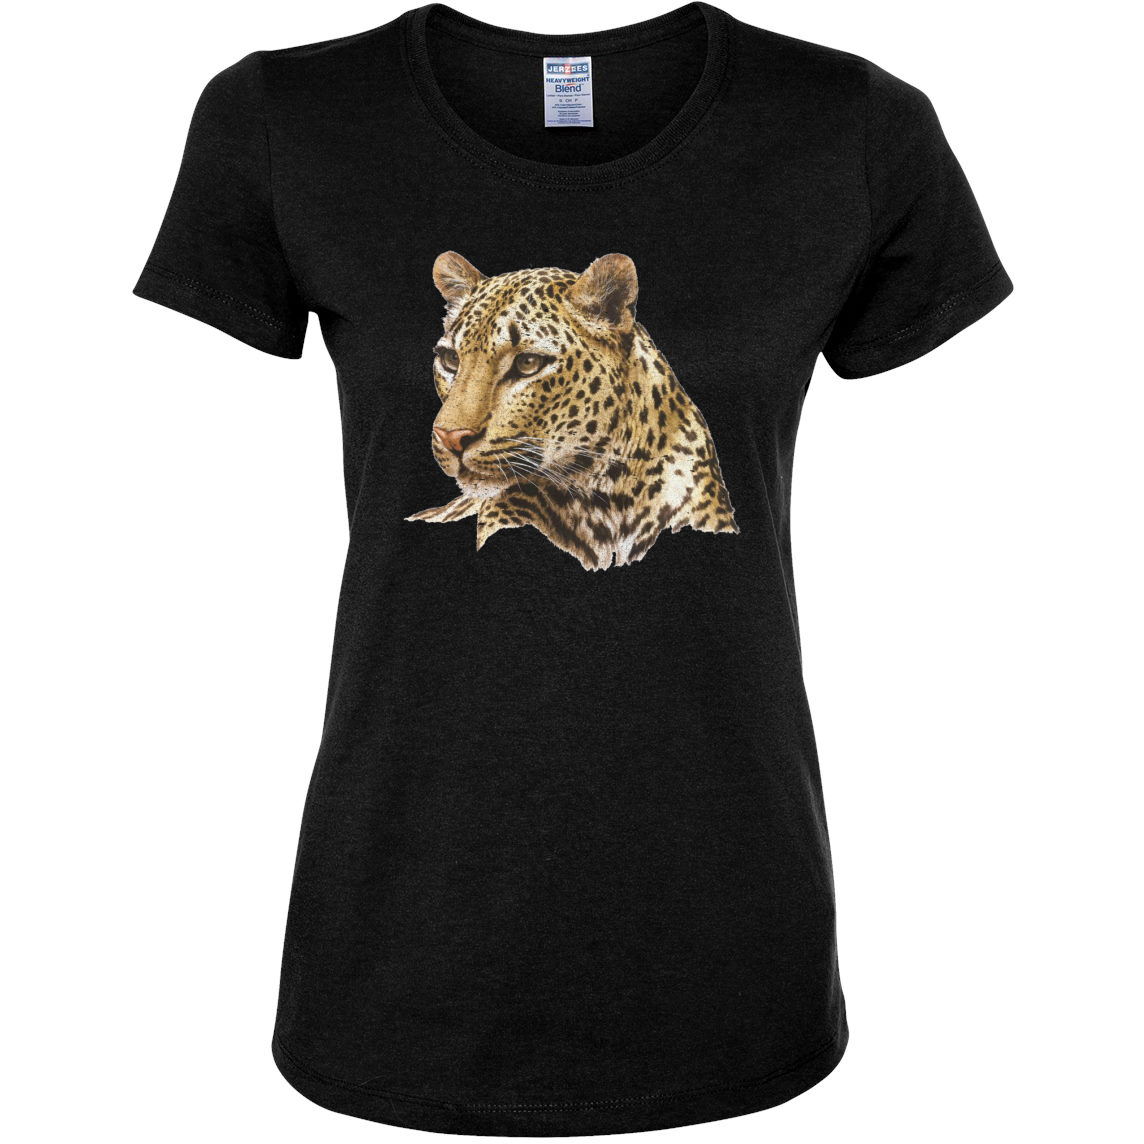 Cute Southeast African Cheetah Animal Lover Womens Graphic T-Shirt - image 1 of 1